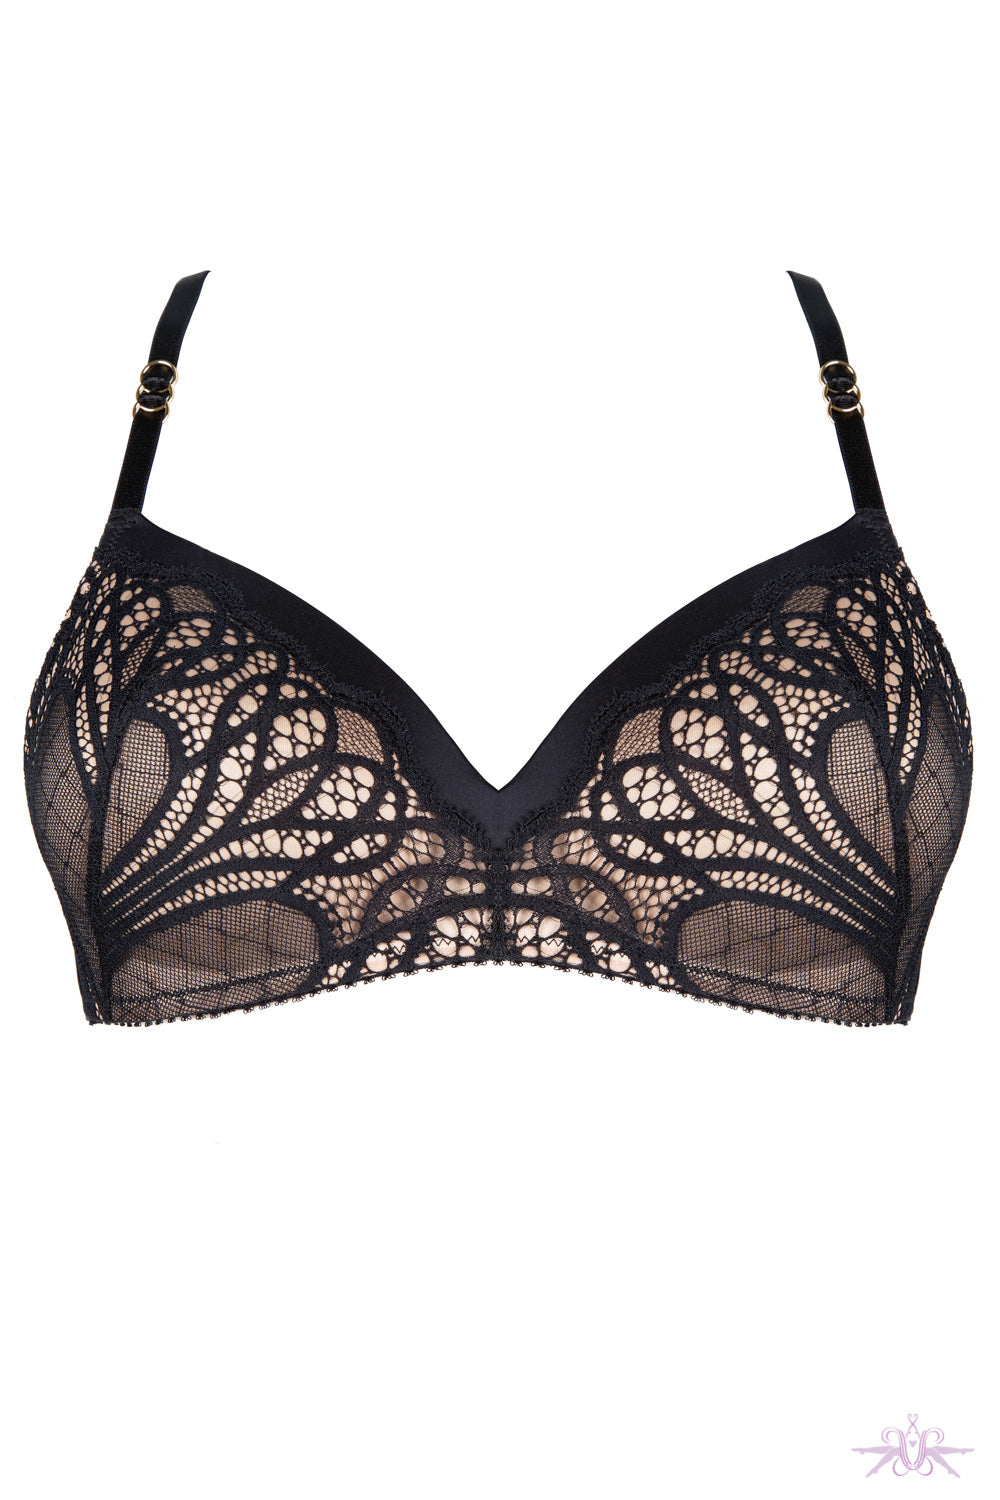 Jolidon Supreme Black Lace Triangle Sheer Mesh Bra at Mayfair Stockings  Luxury Bras and Lingerie